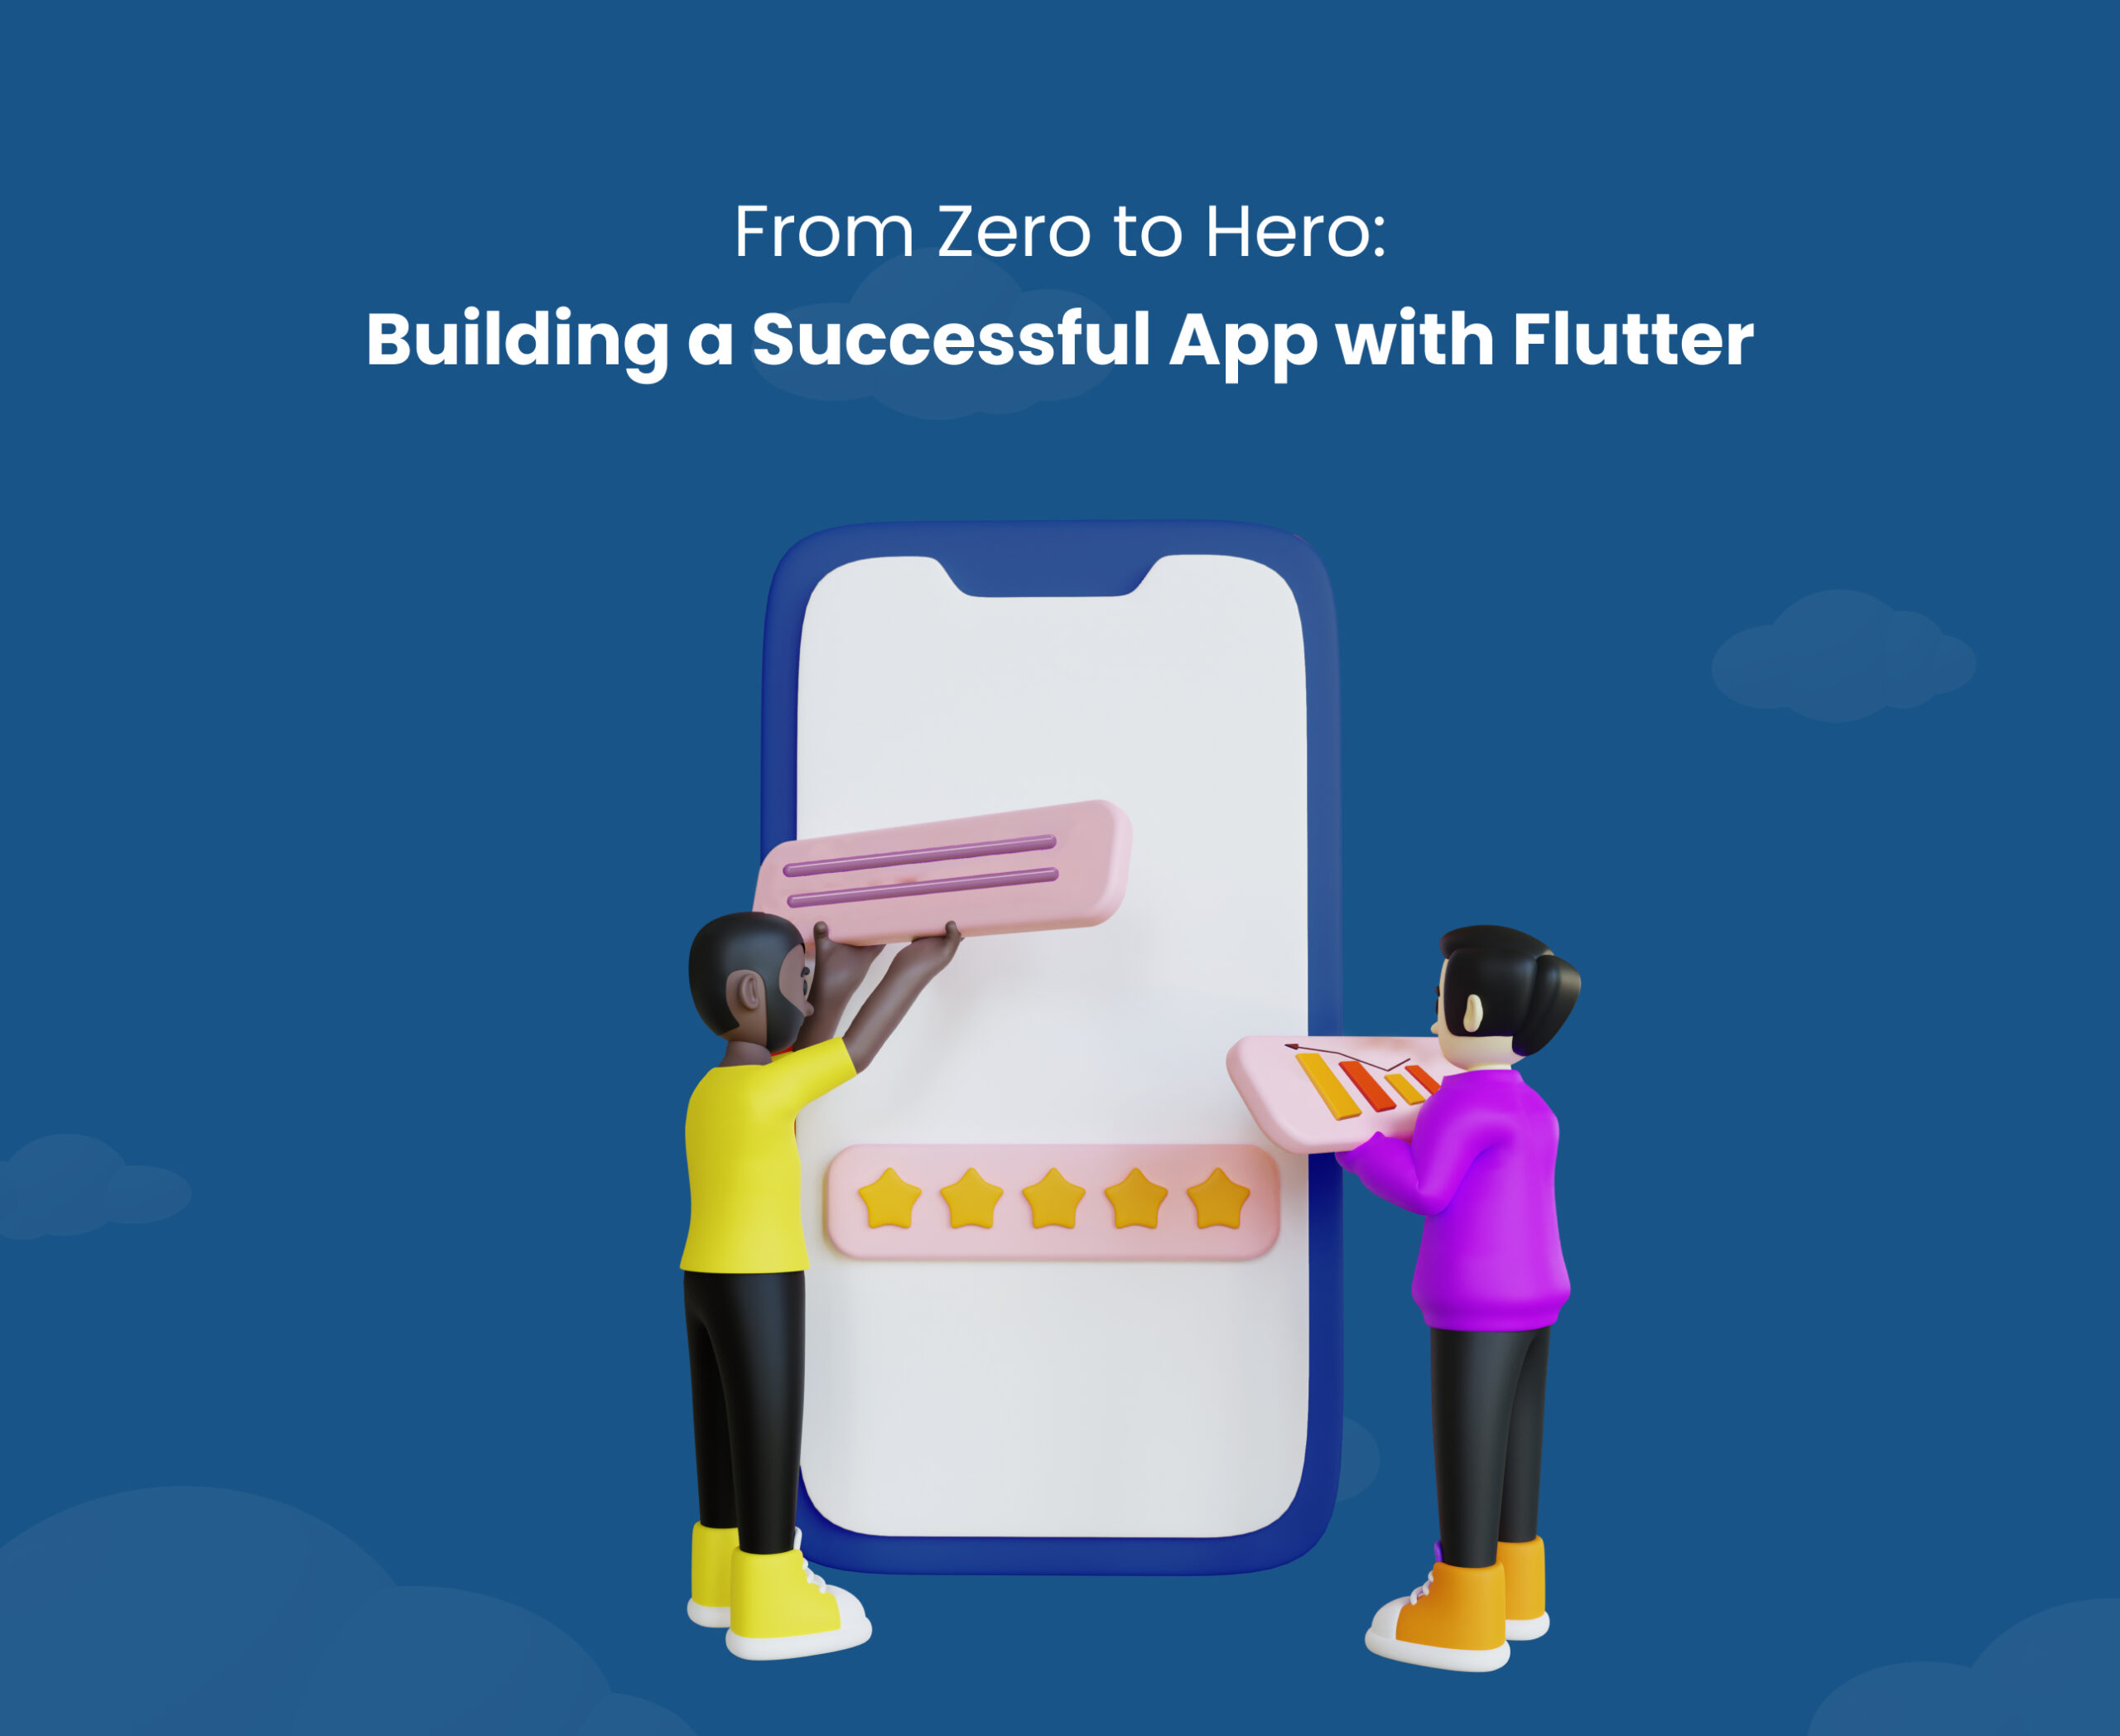 From Zero to Hero: Building a Successful App with Flutter